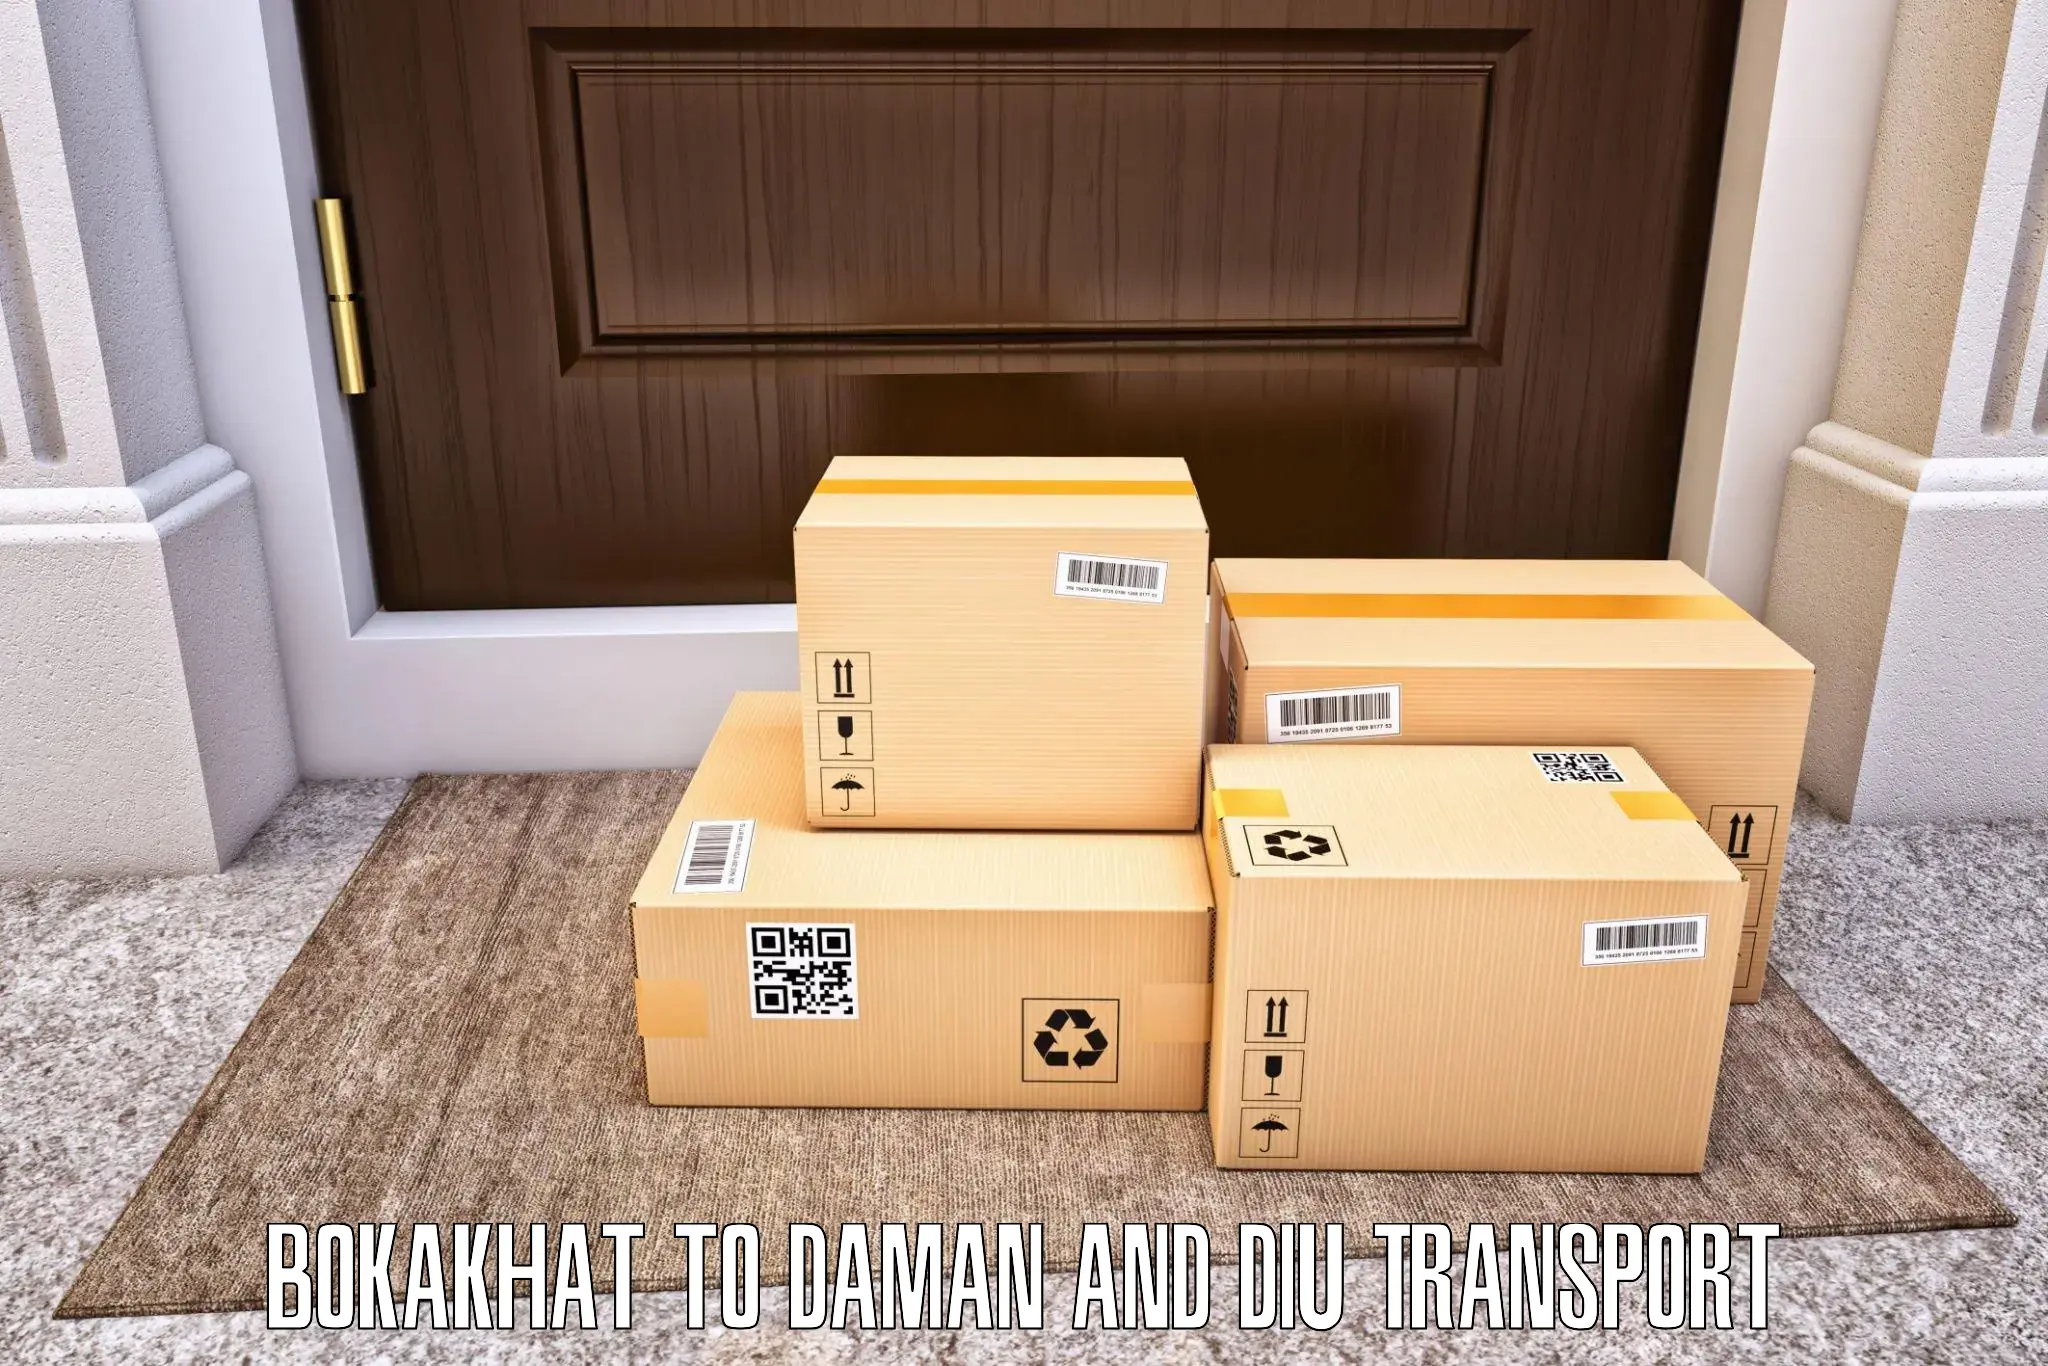 Truck transport companies in India Bokakhat to Daman